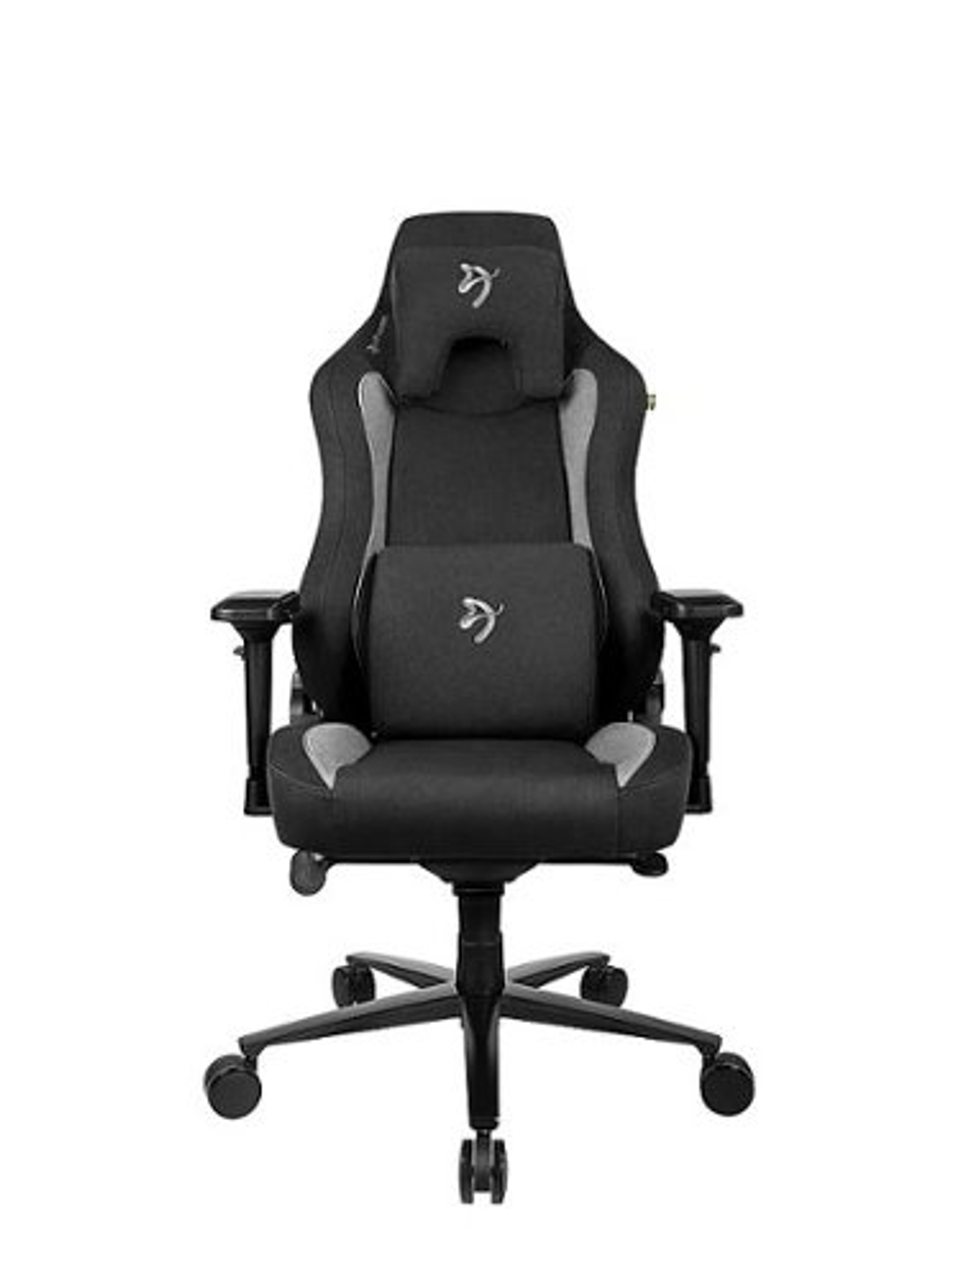 Arozzi - Vernazza Series Top-Tier Premium Supersoft Upholstery Fabric Office/Gaming Chair - Black